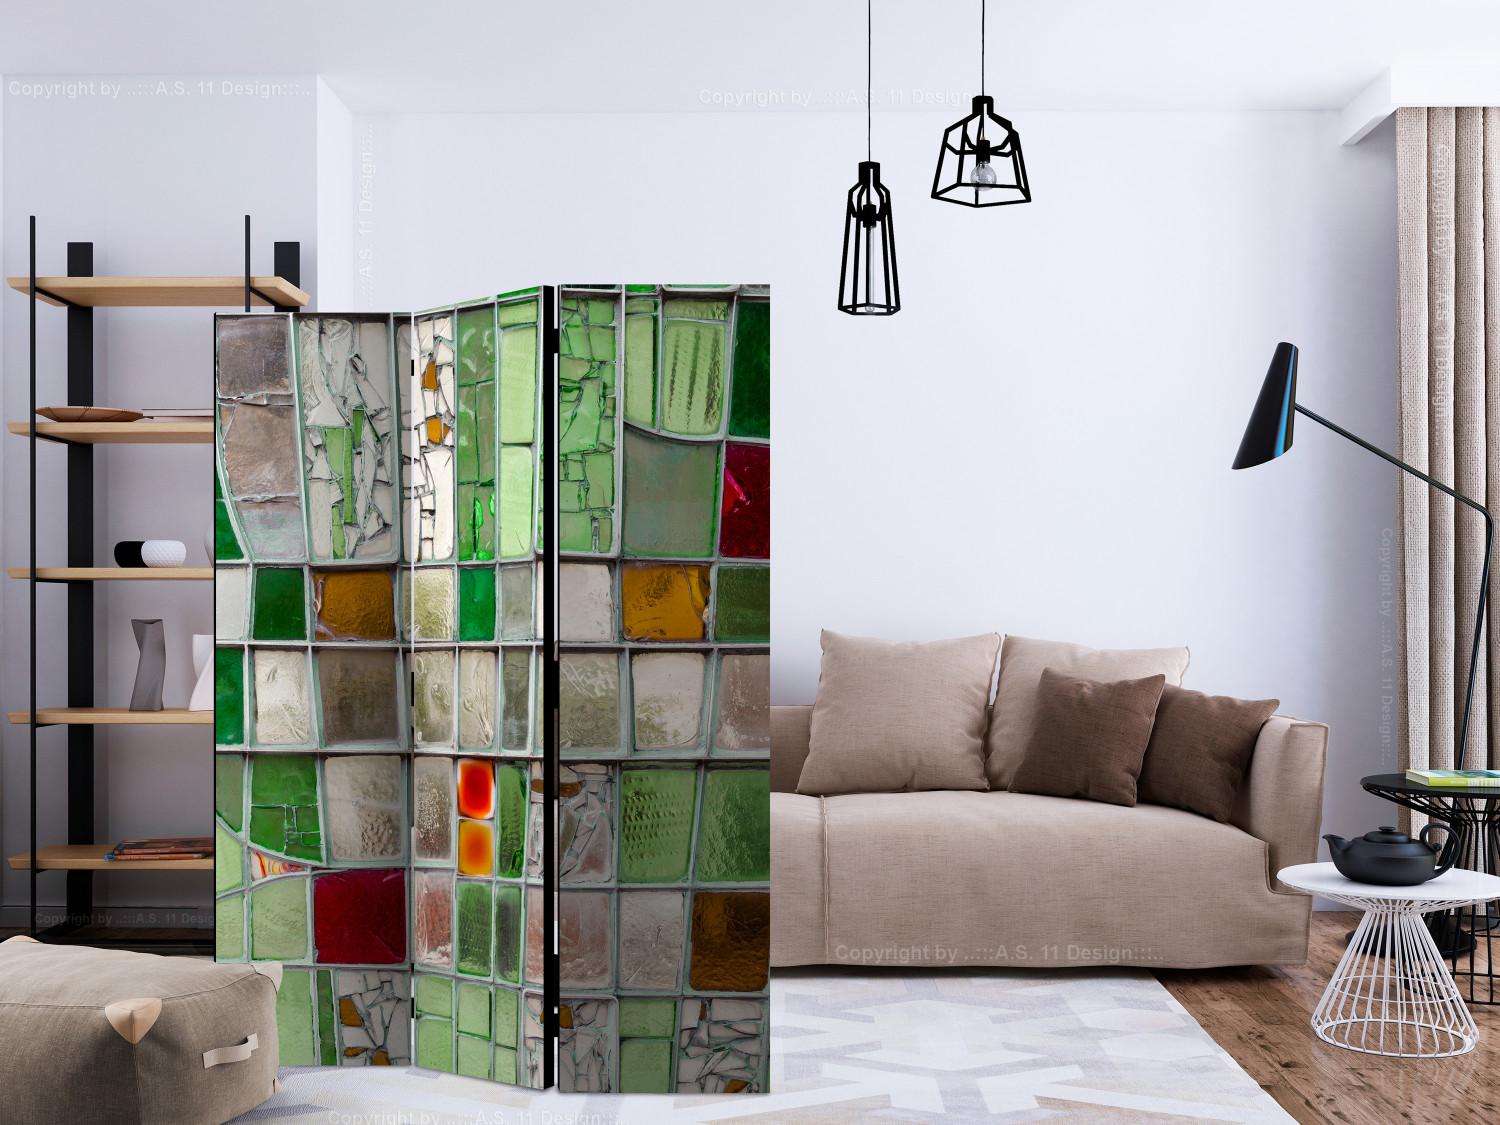 Biombo decorativo Emerald Stained Glass [Room Dividers]